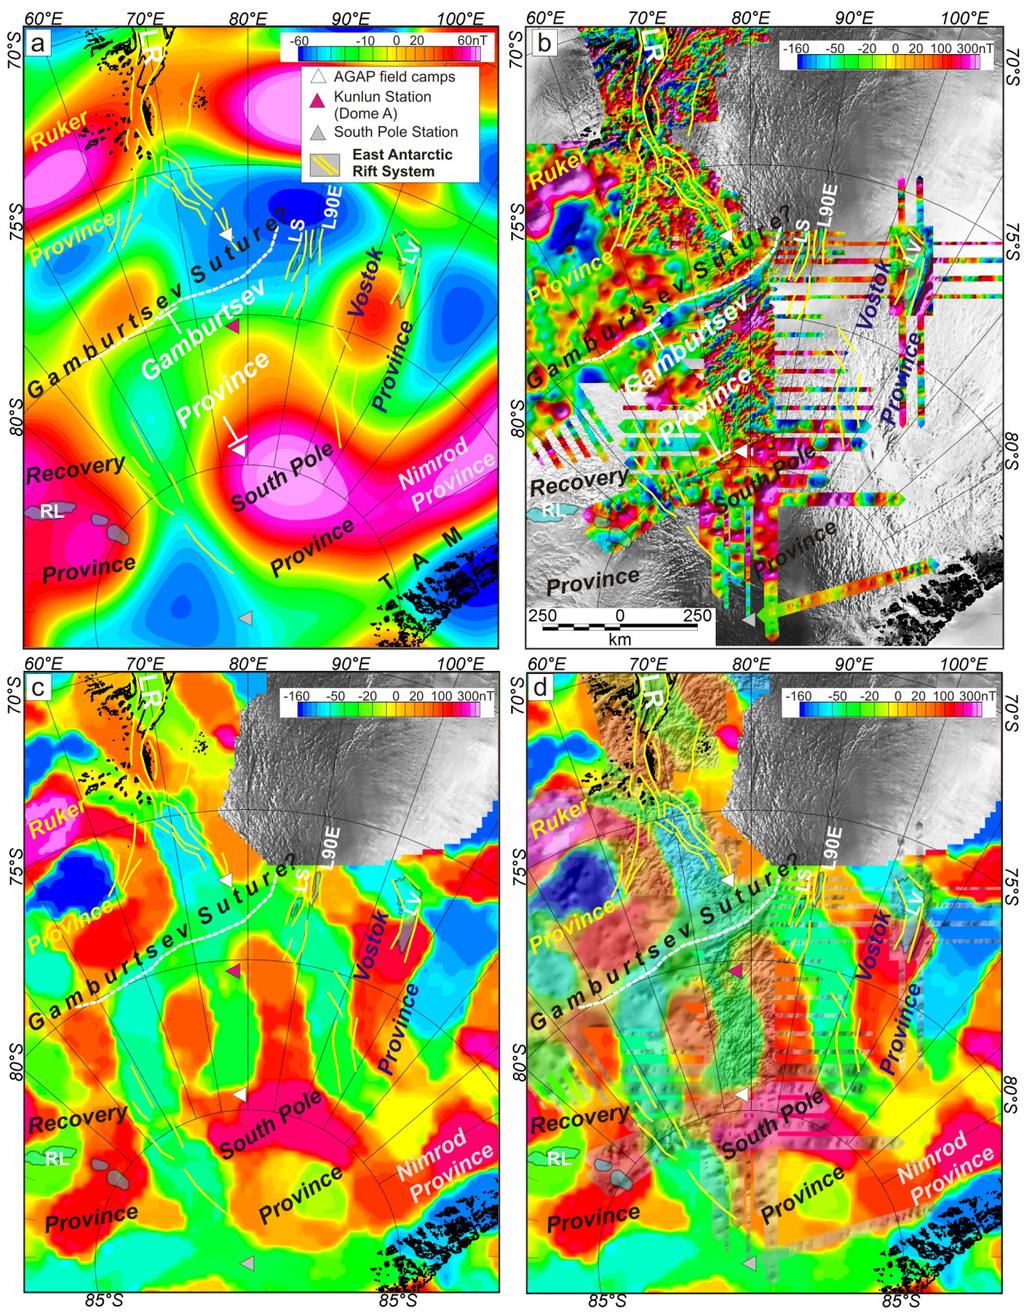 Supplementary Figure 2. Comparison between satellite magnetic and aeromagnetic data over the Gamburtsev Subglacial Mountains region in East Antarctica.